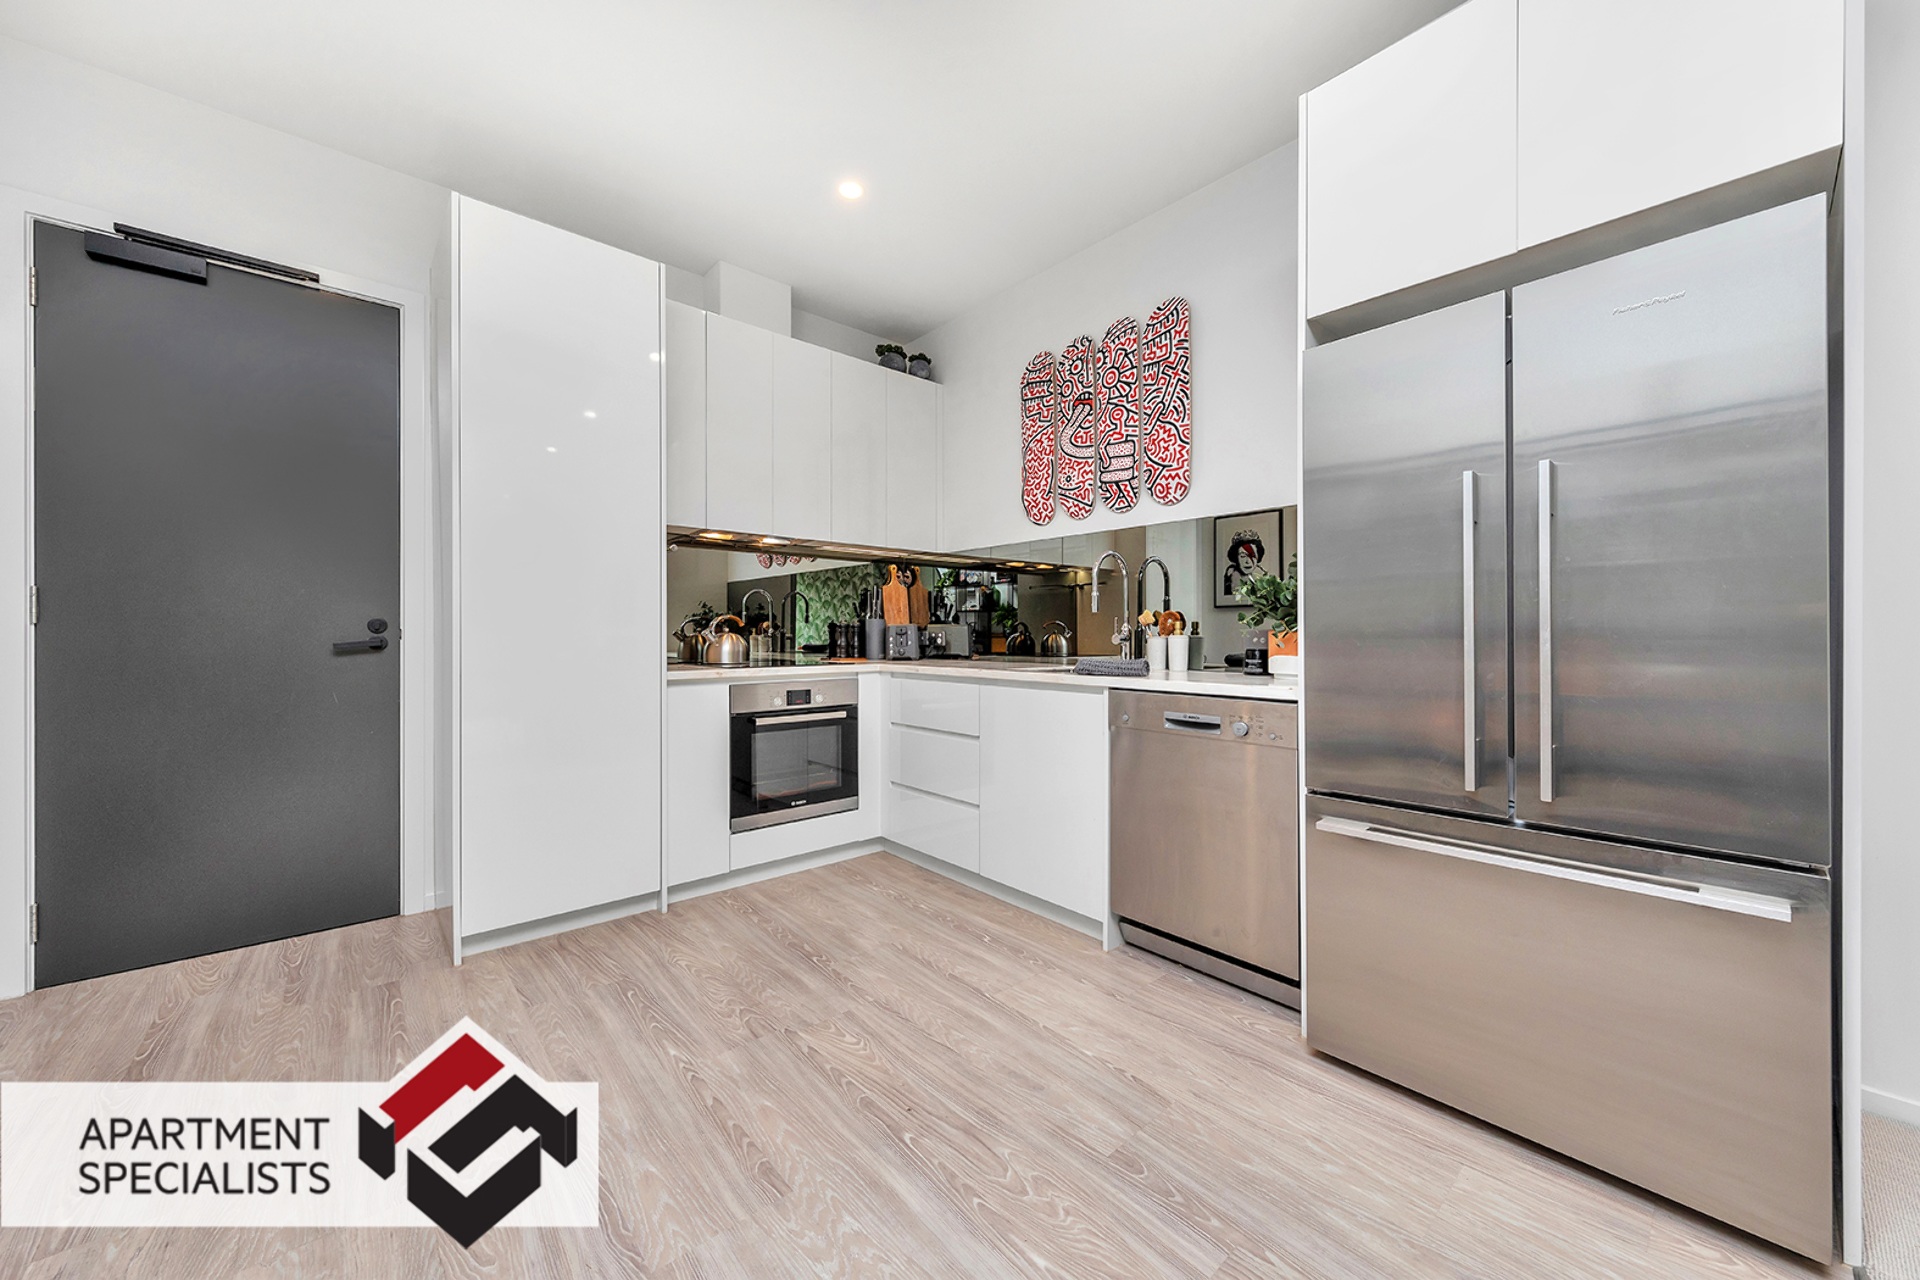 6 | 8 Hereford Street, Freemans Bay | Apartment Specialists